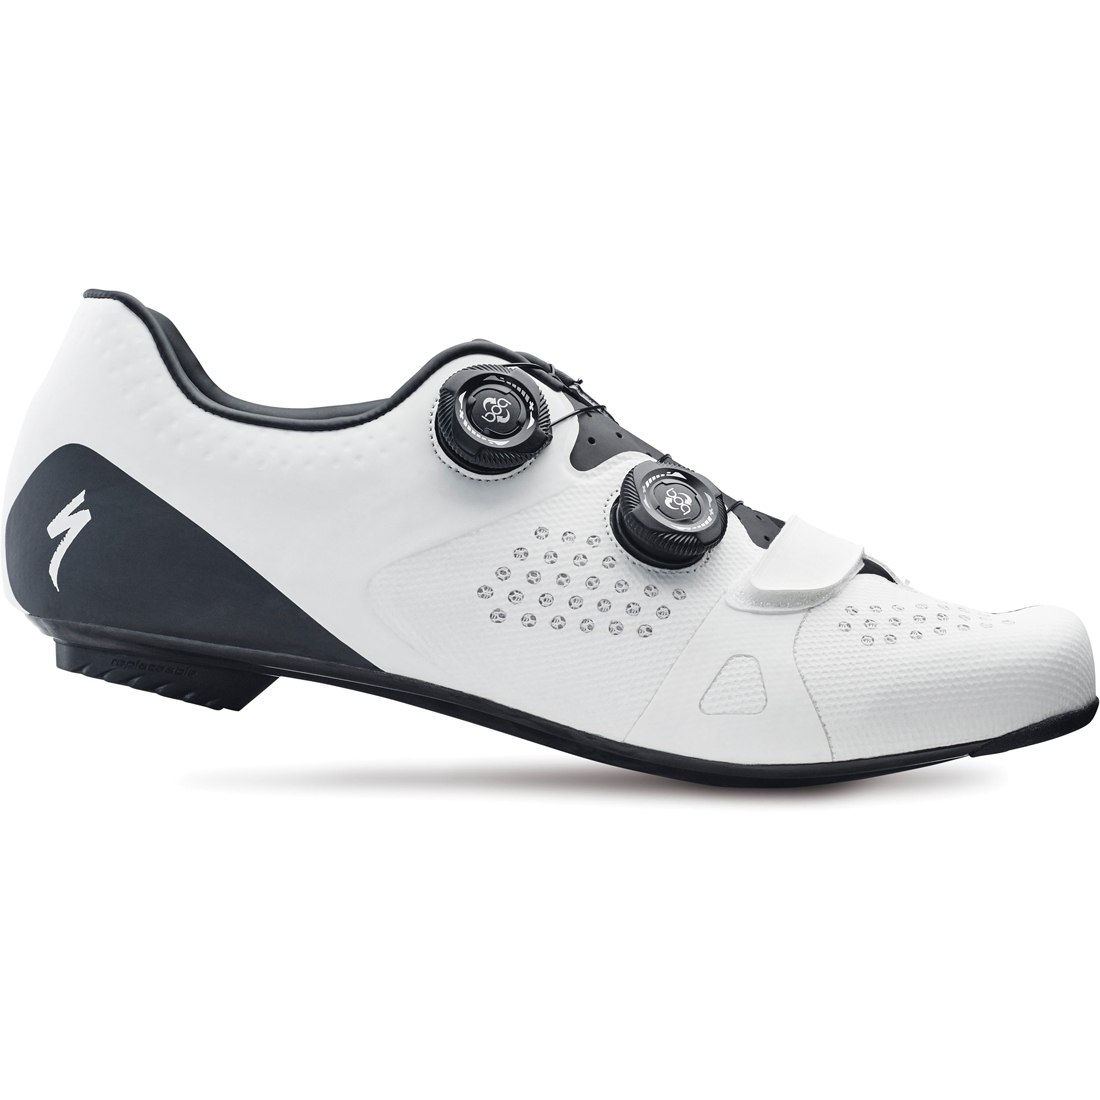 Picture of Specialized Torch 3.0 Road Shoes - White